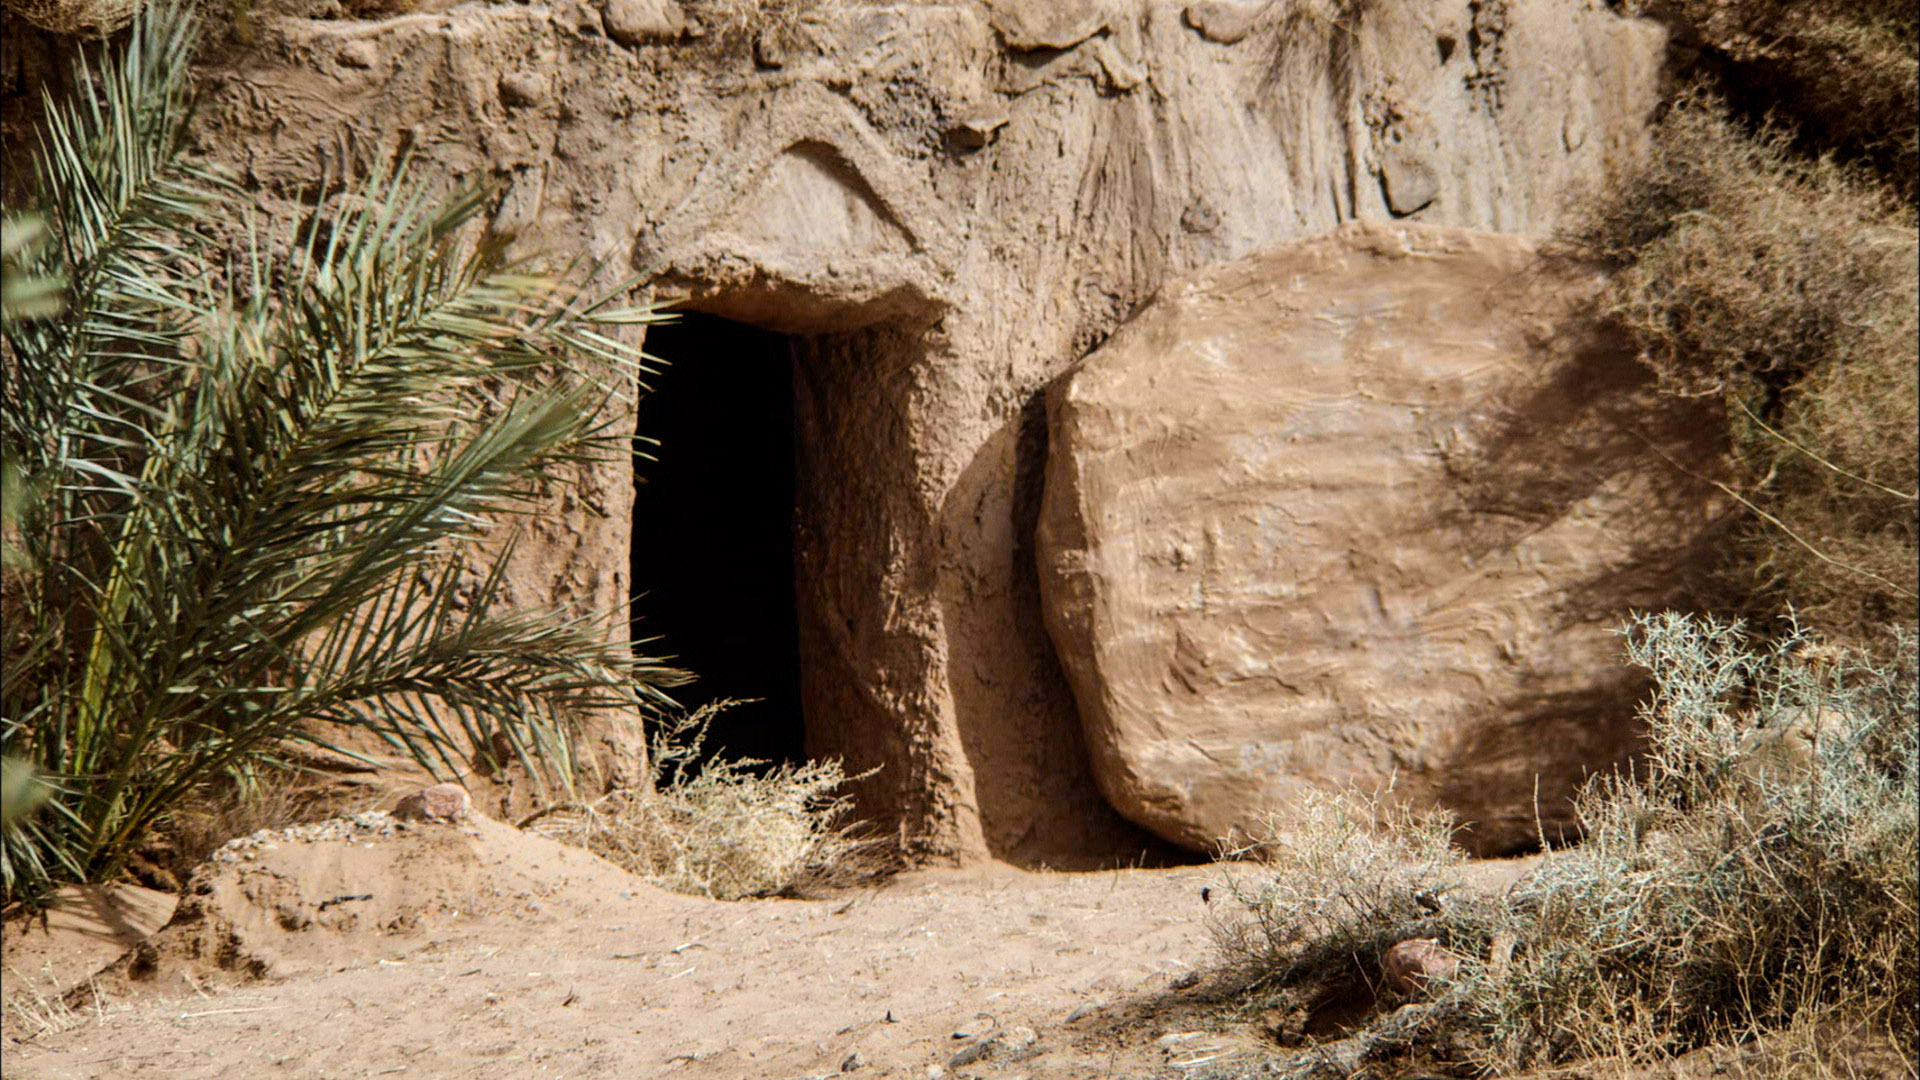 Sunday Morning - Easter Morning - "Death, Burial, Resurrection, and the Second Coming"